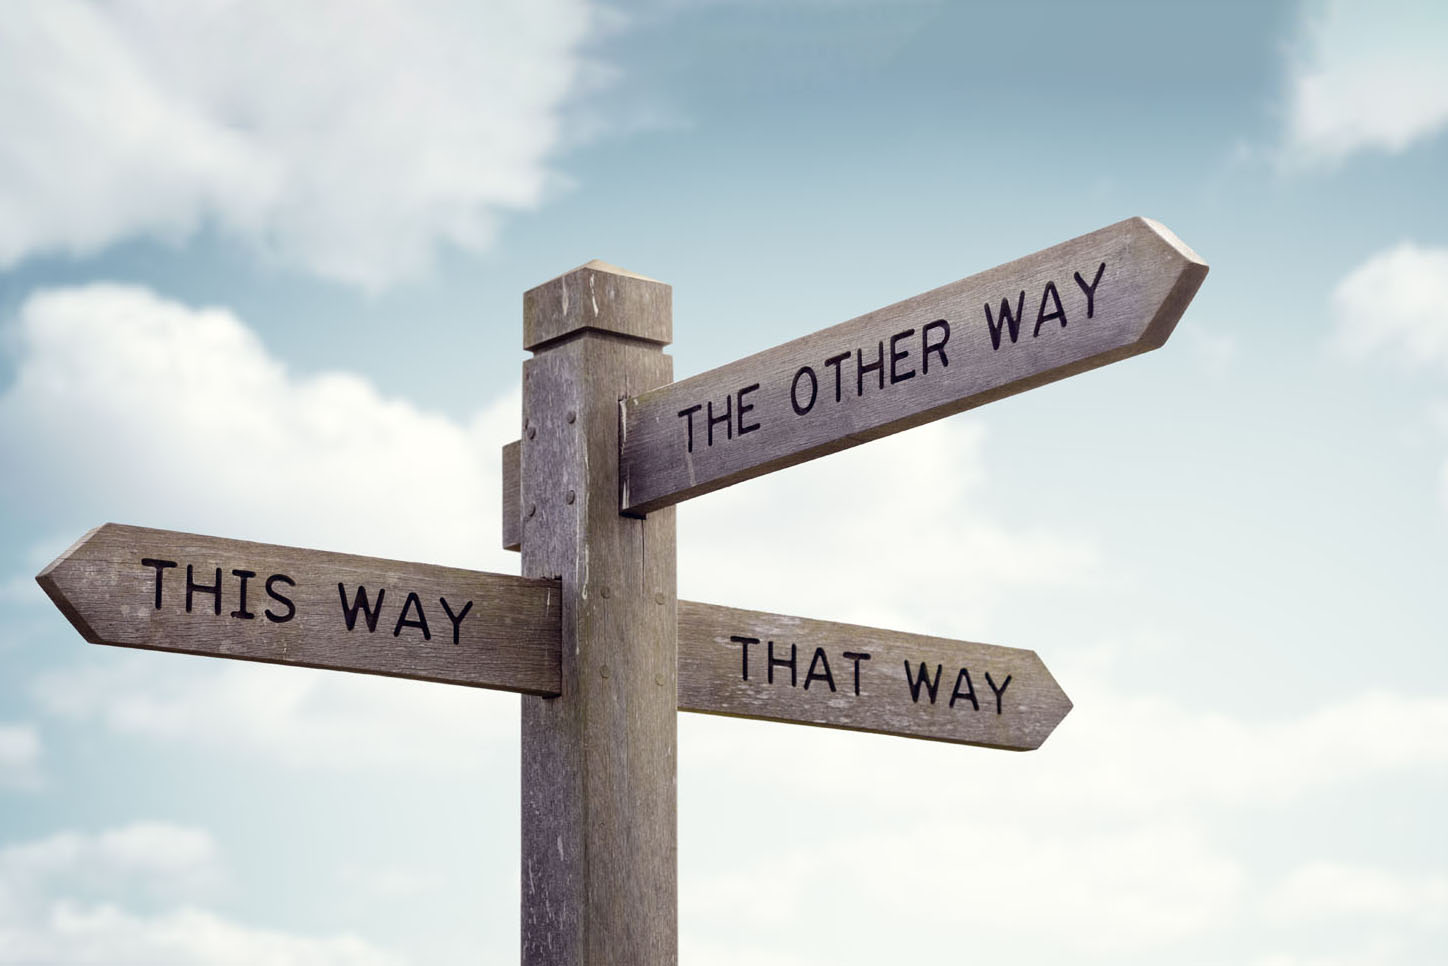 a wooden sign post says 'this way' 'that way' 'the other way' with different directions